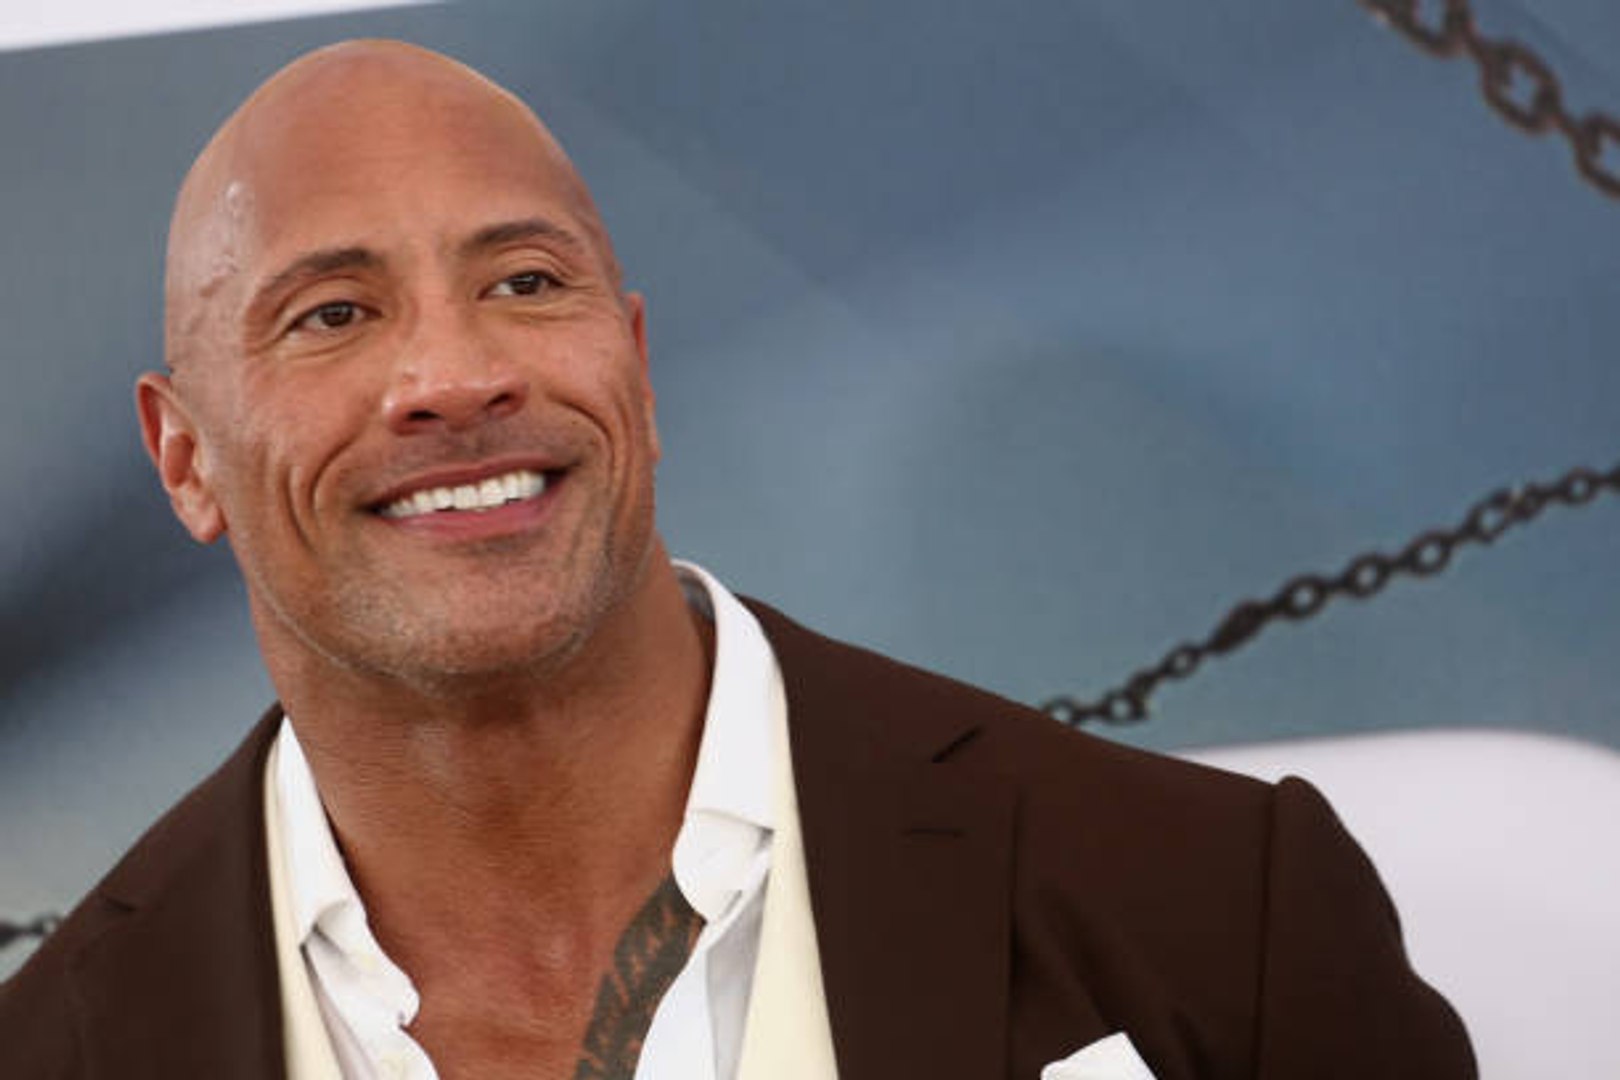 The Top 10 Highest-Paid Actors of 2019